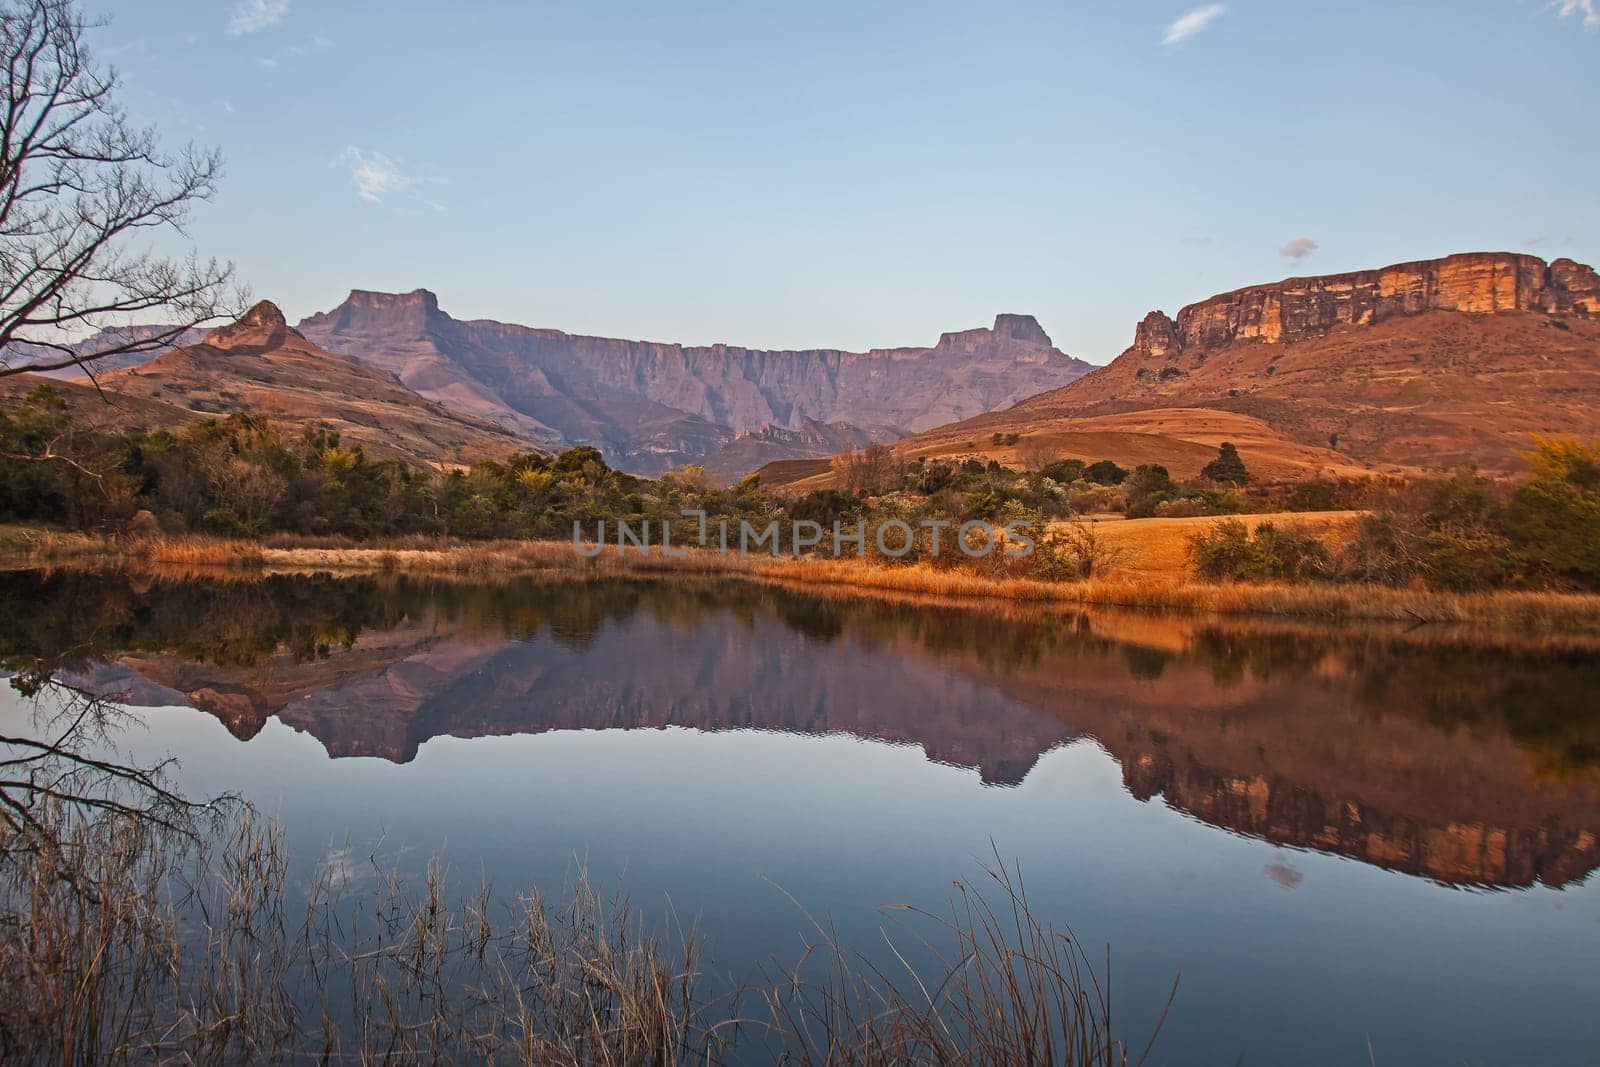 Scenic reflections in a Drakensberg lake 15540 by kobus_peche